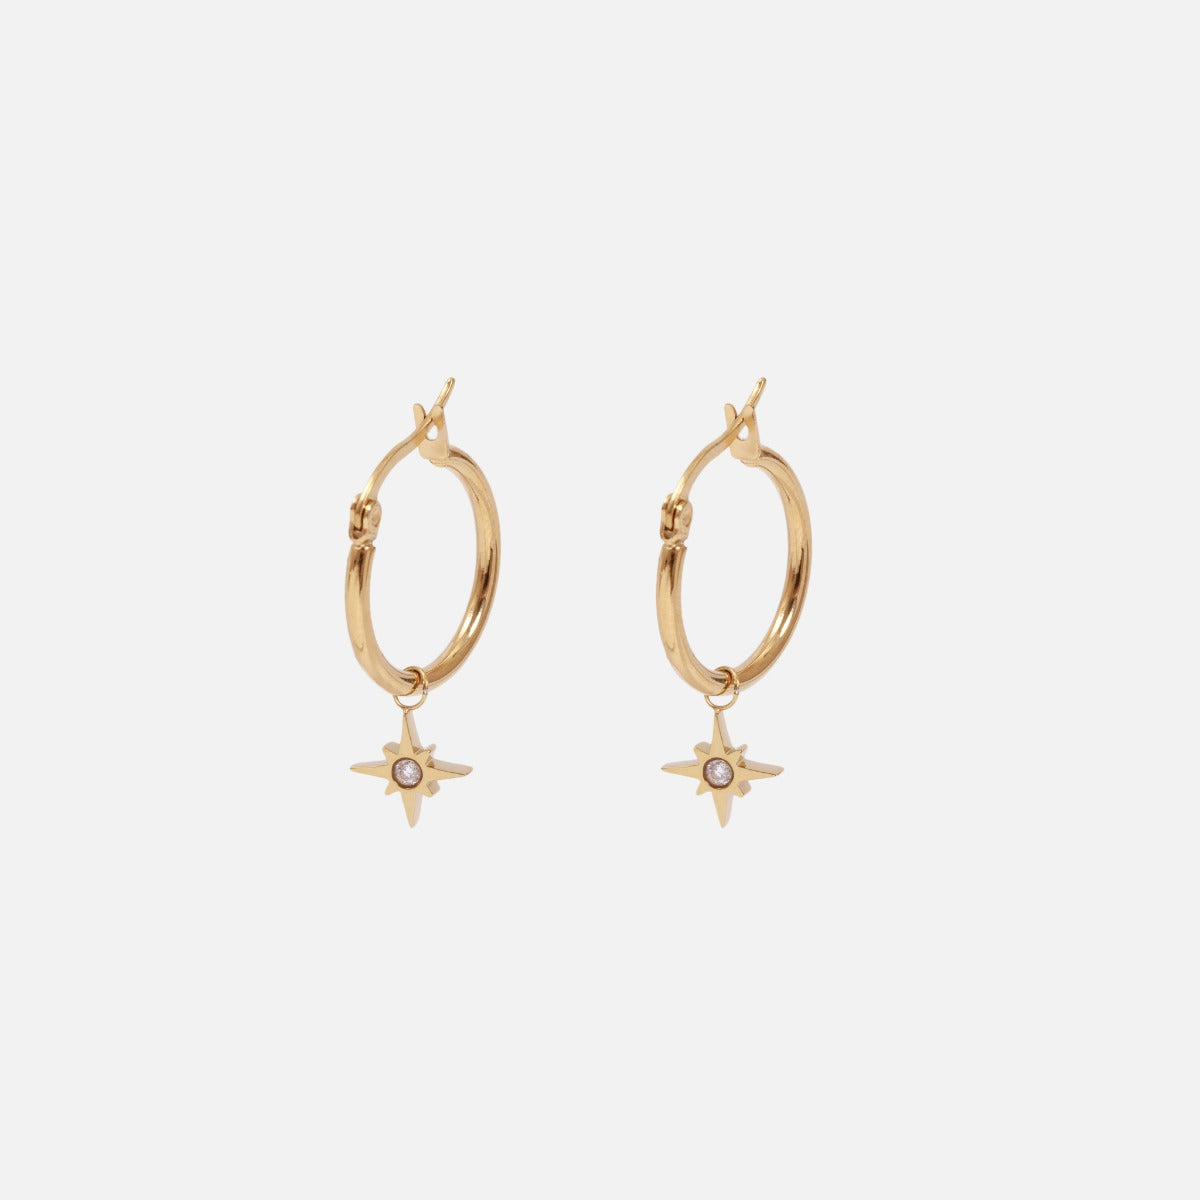 Golden earrings with star charm in stainless steel